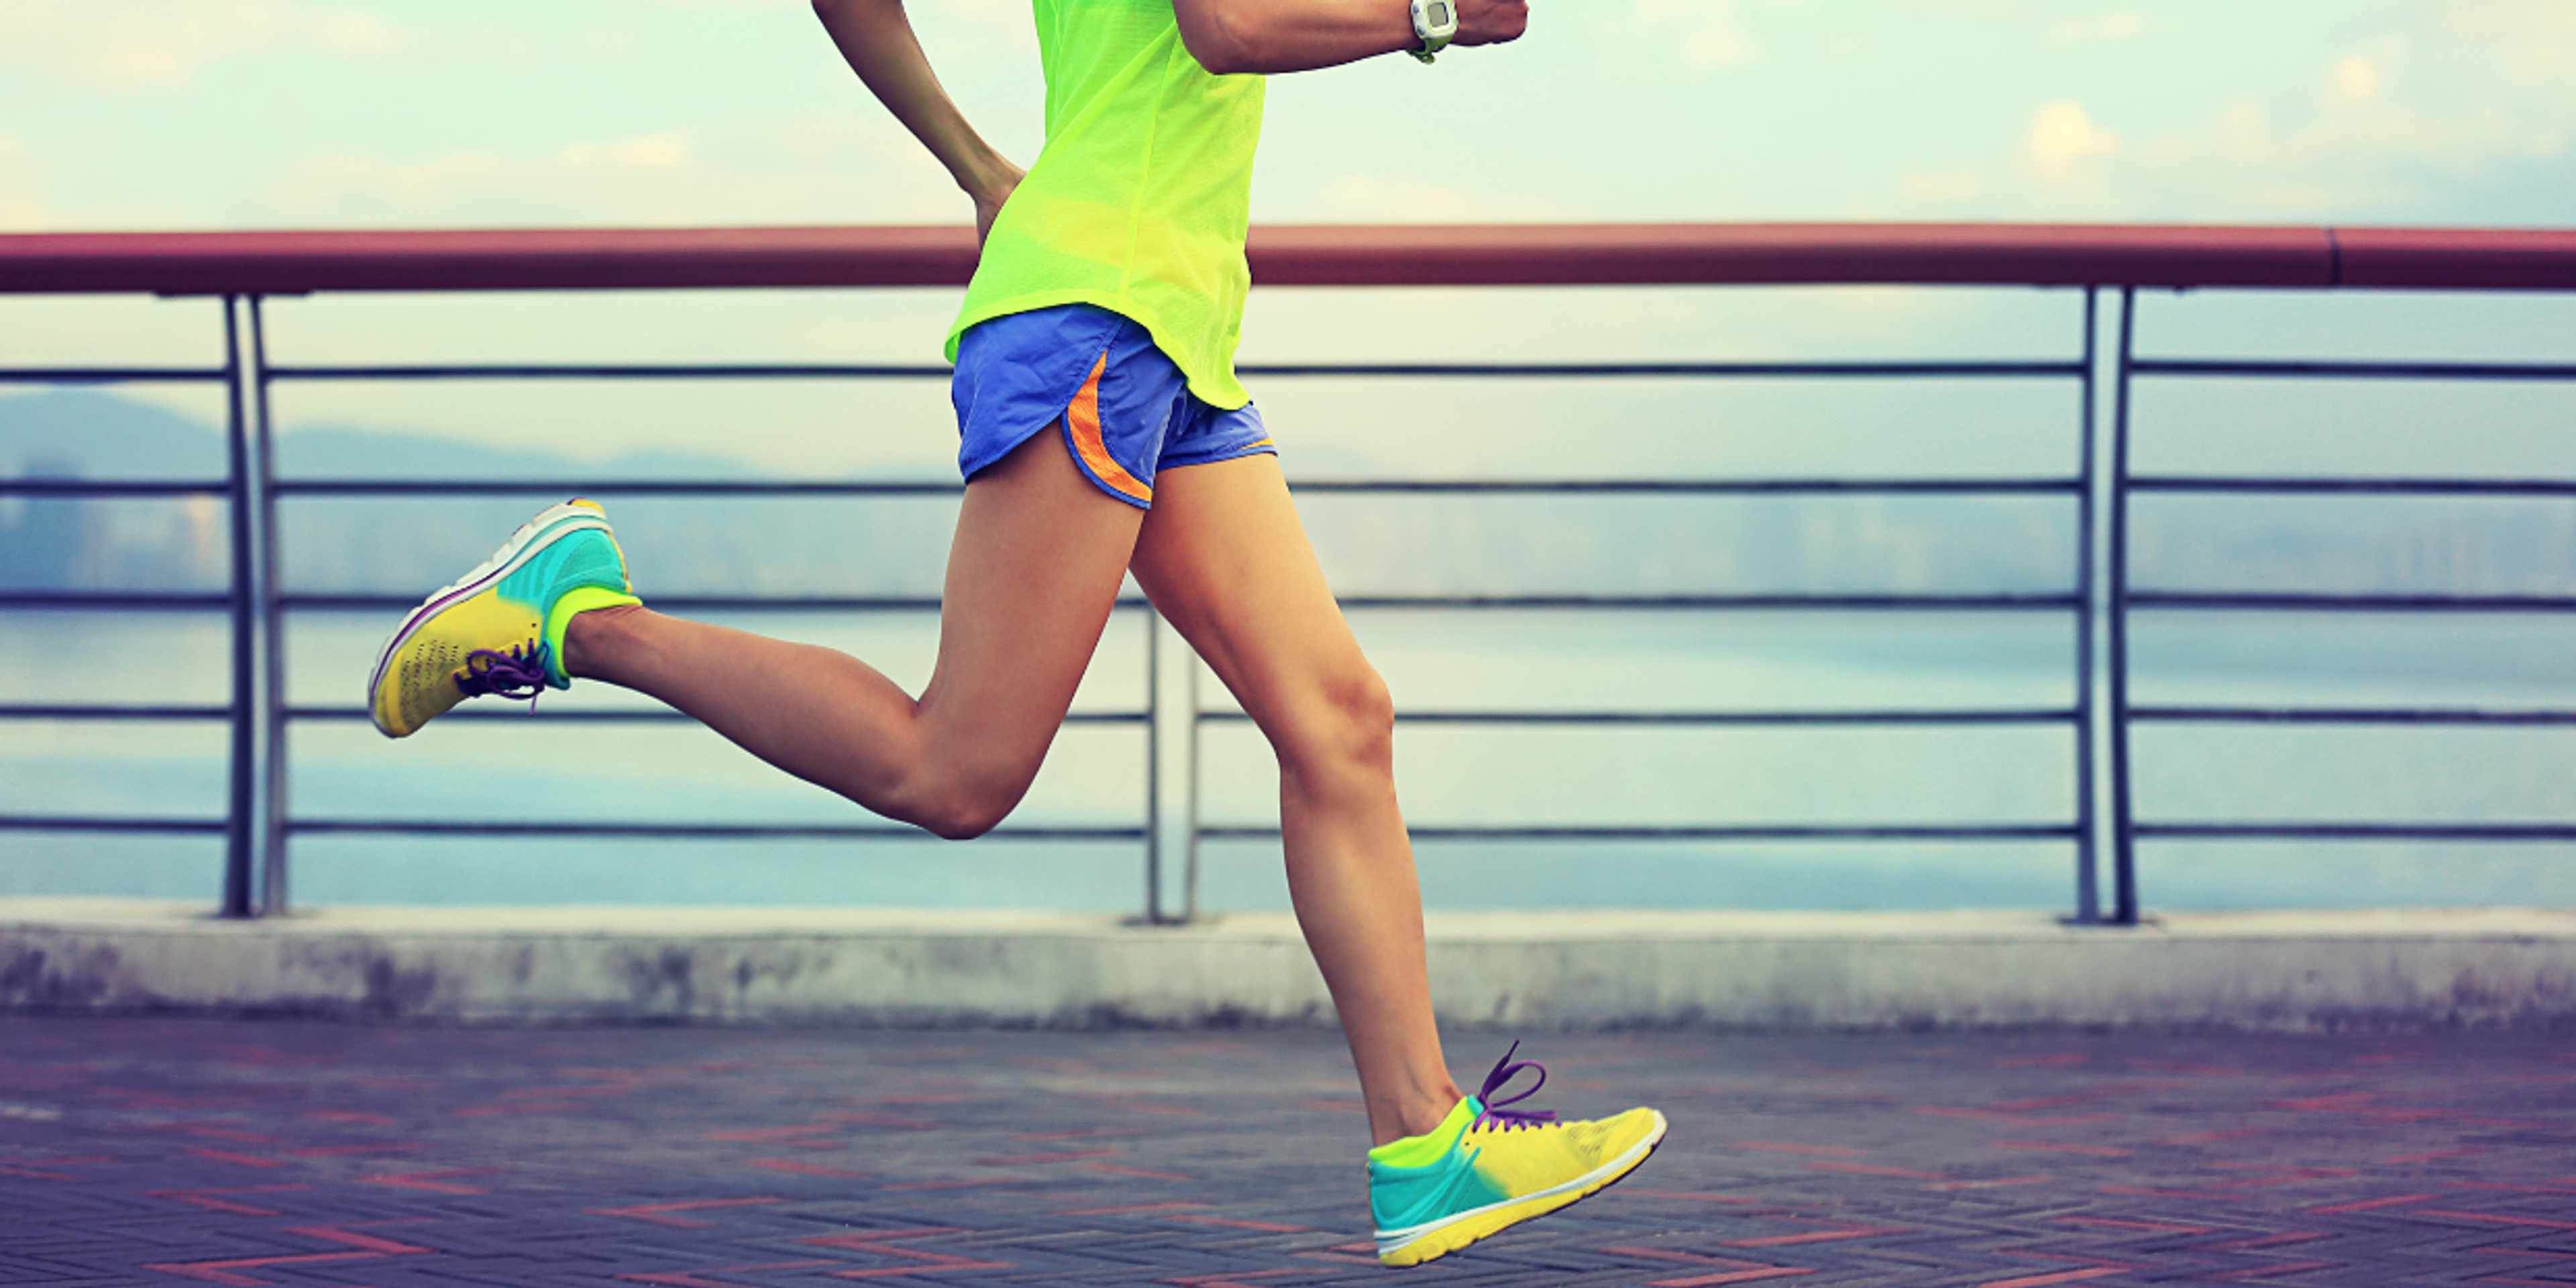 A run-and-walk program is the safest way to return to running after a meniscus tear.